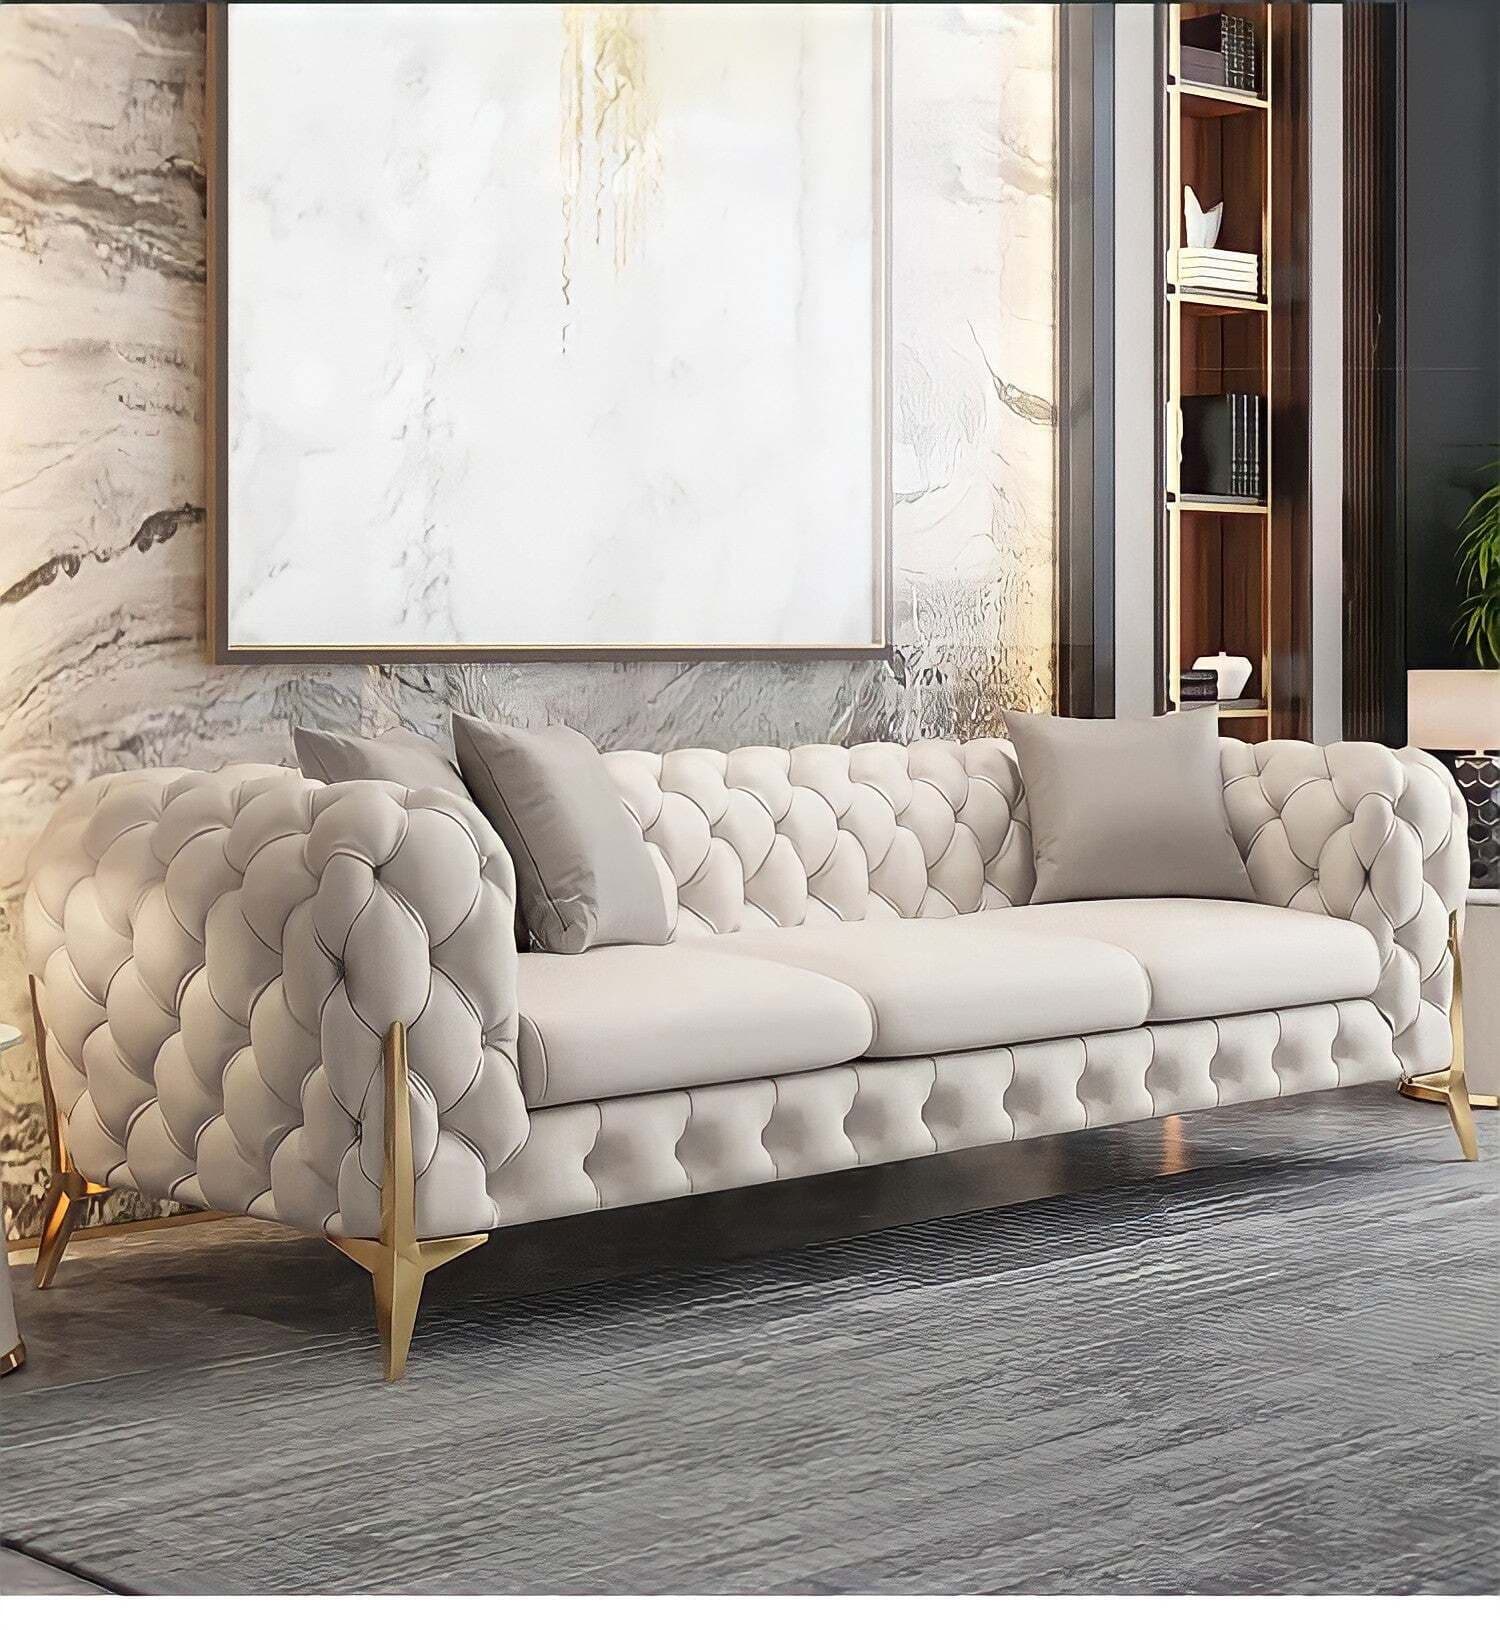 Chesterfield Sofas Sets In Luxury Light Cream Leather Style